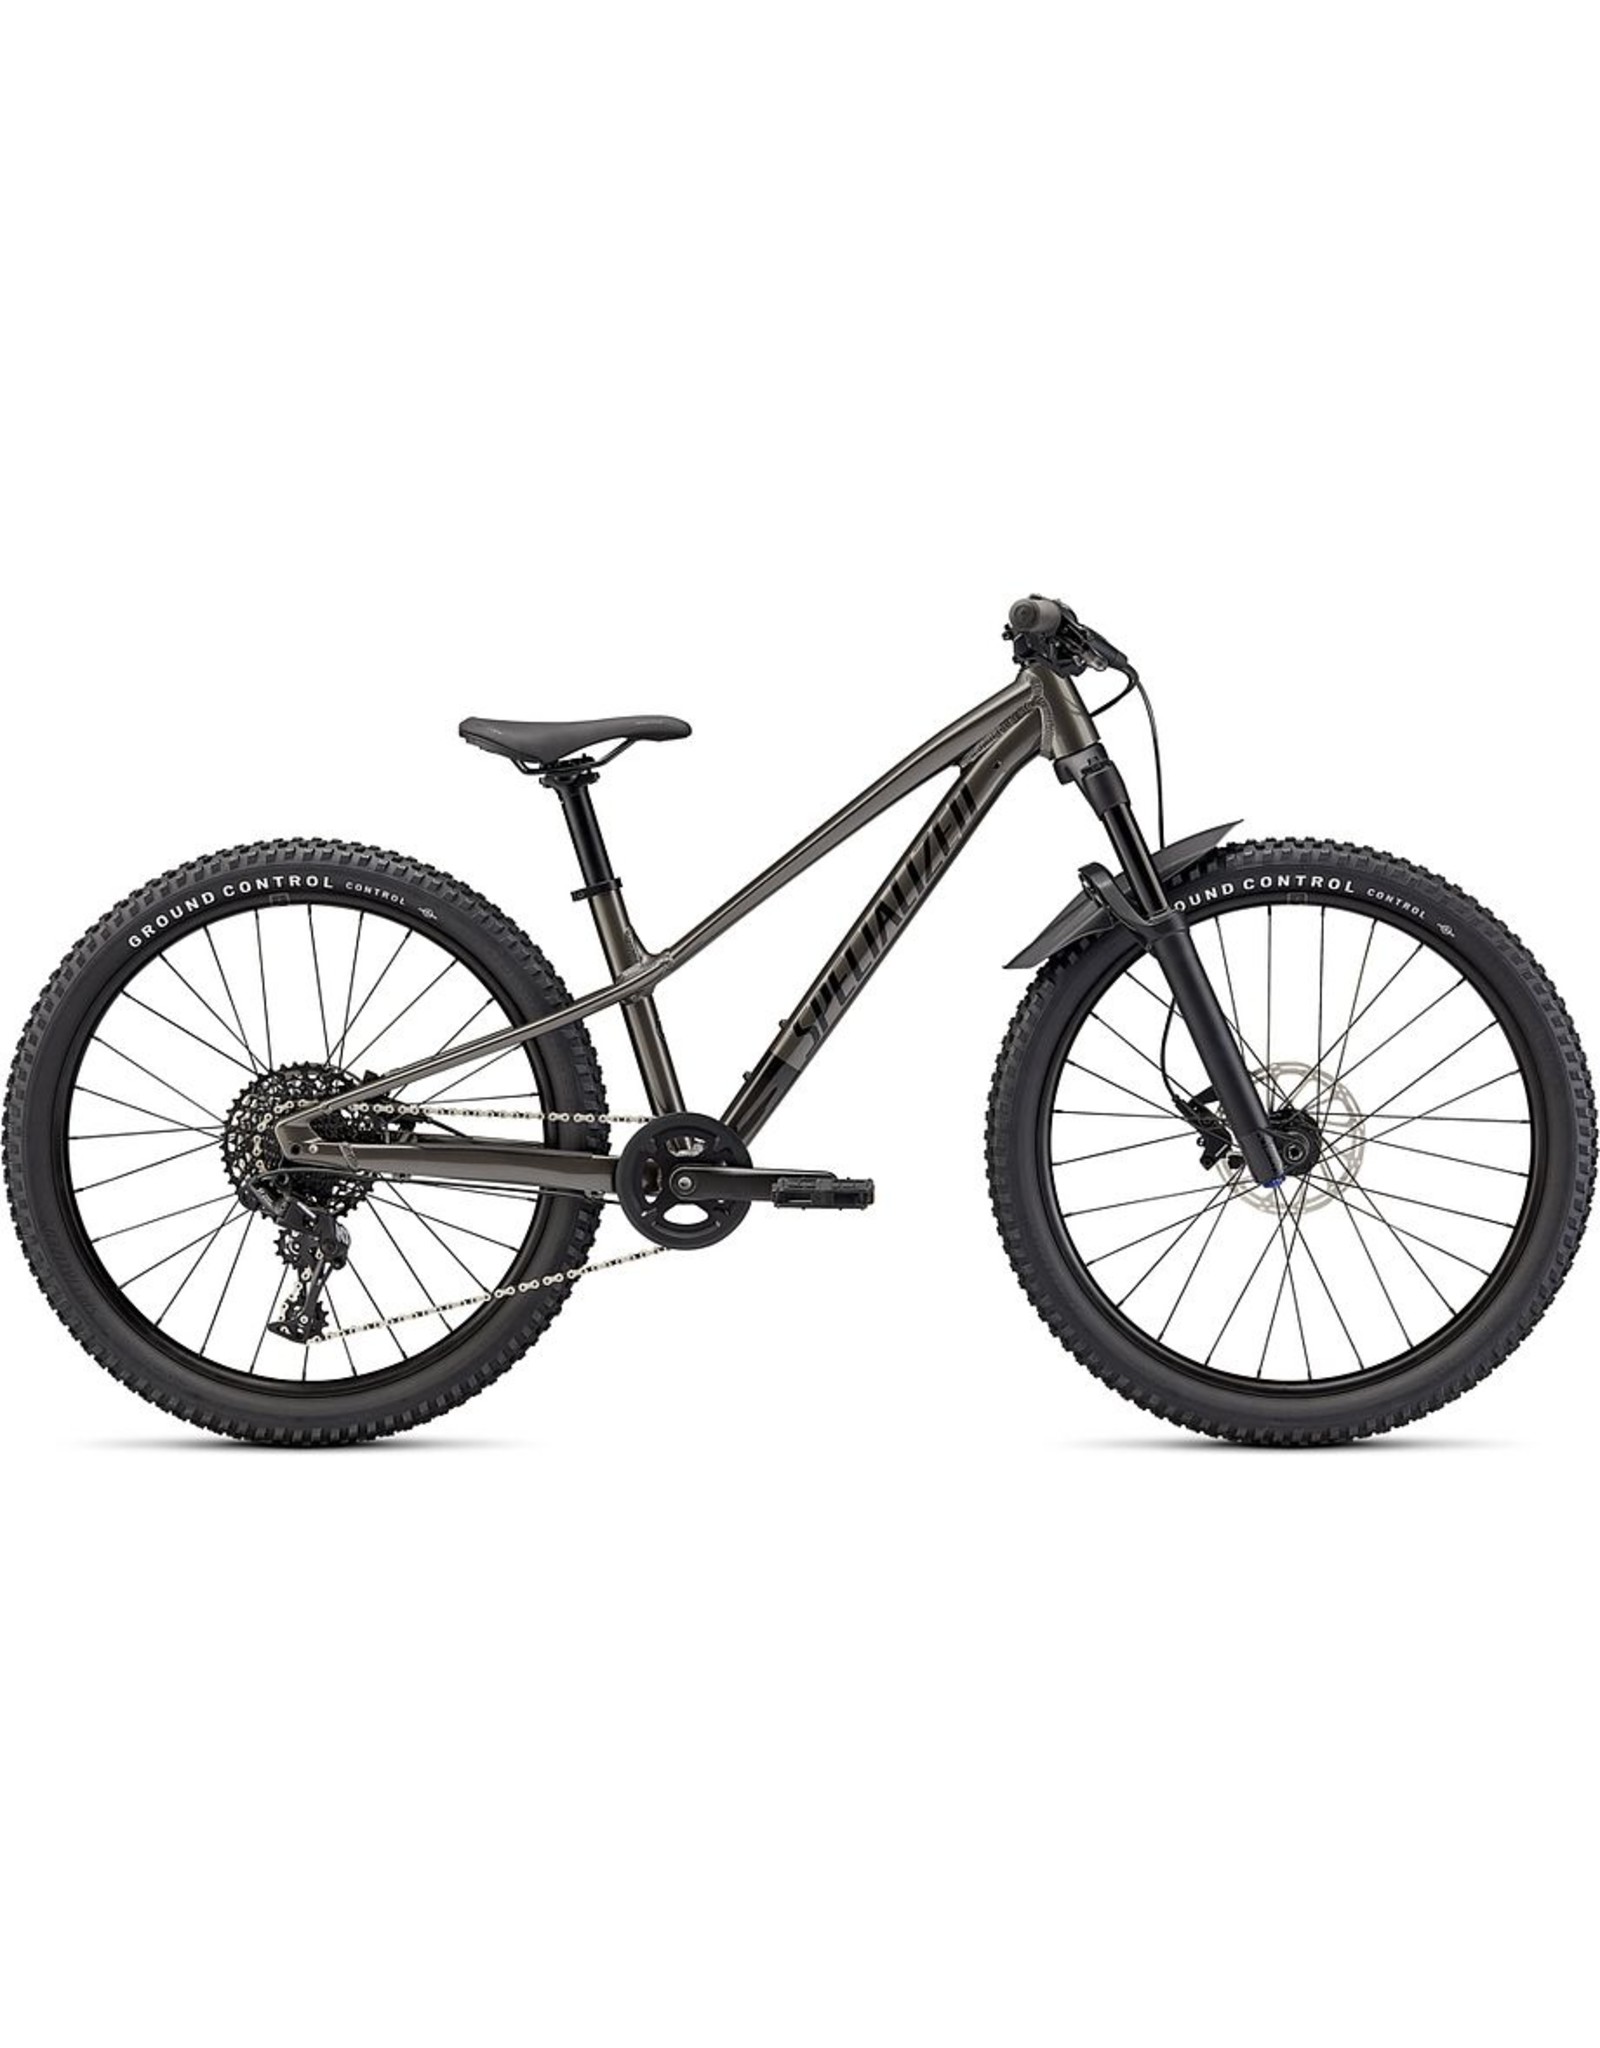 Specialized RIPROCK EXPERT 24 INT SMK/BLK